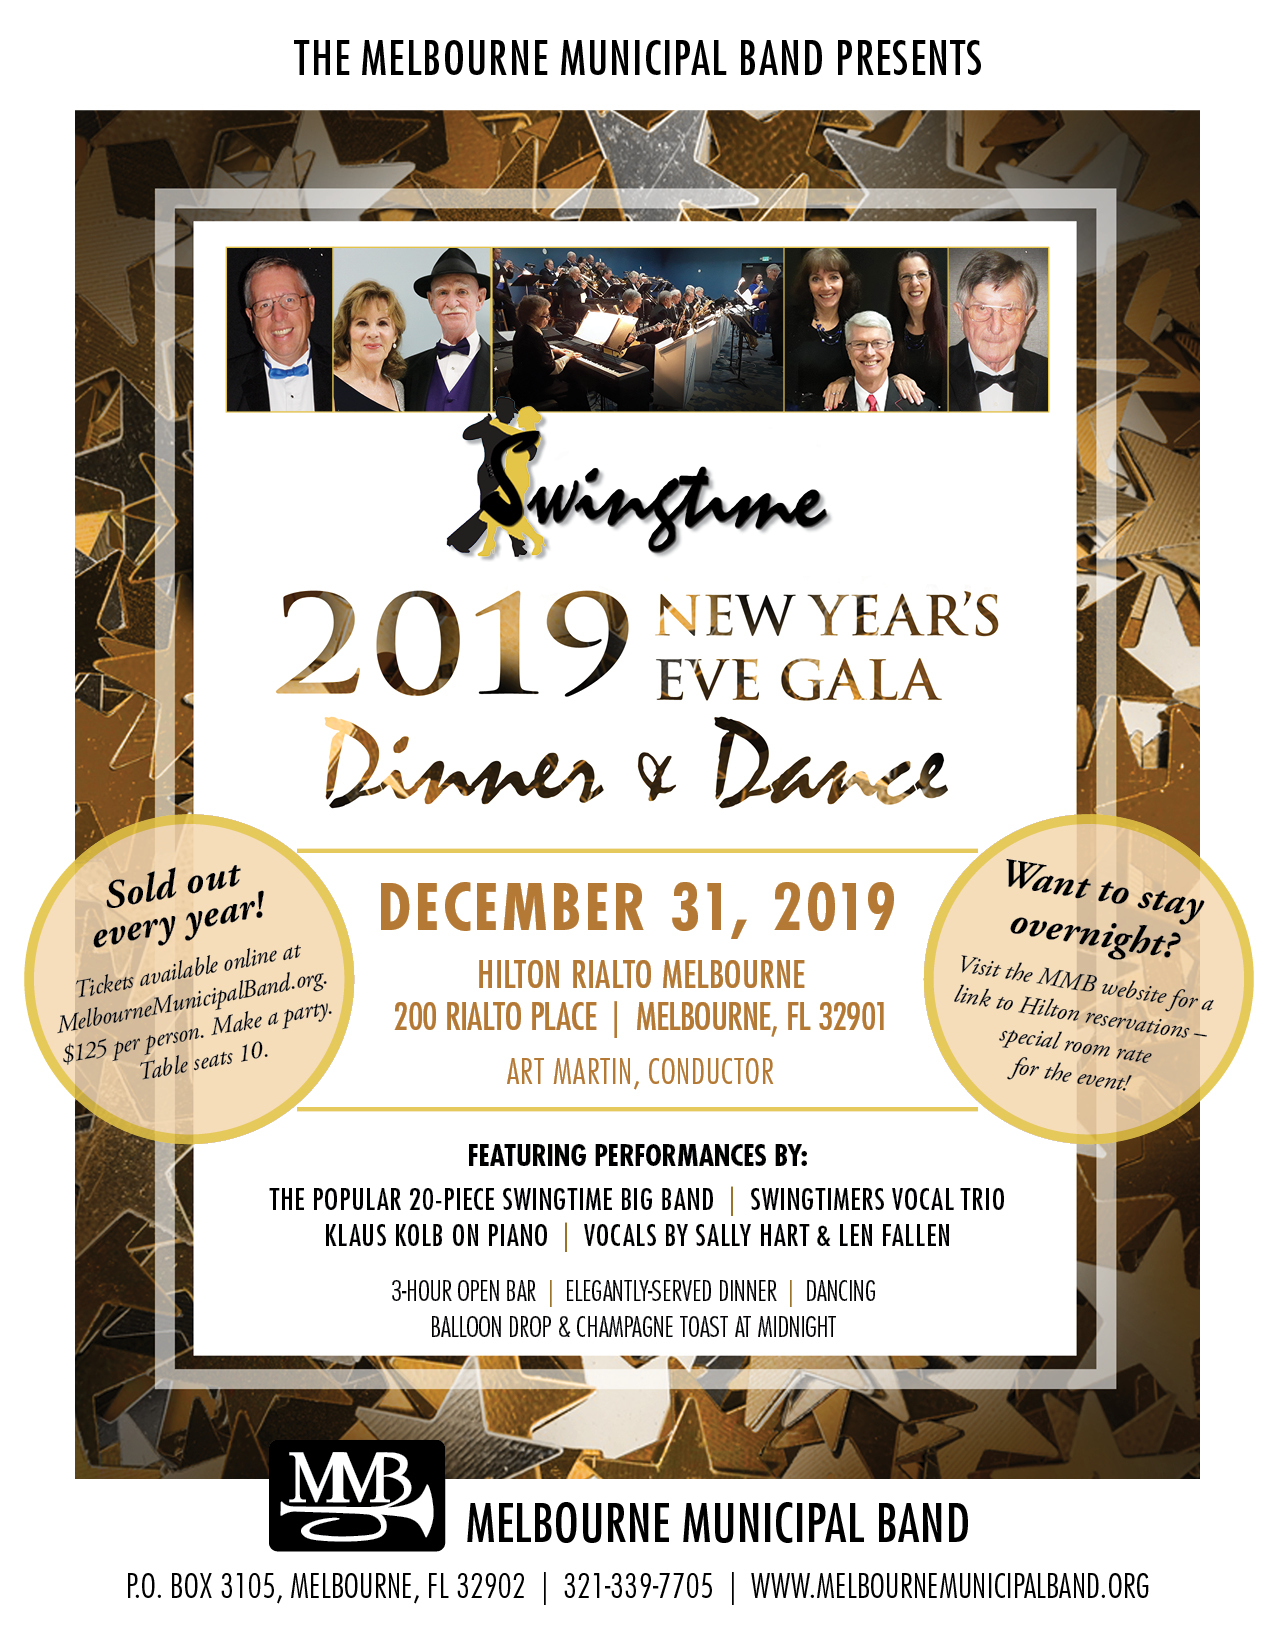 2019 New Year's Eve Gala presented by The Melbourne Municipal Band